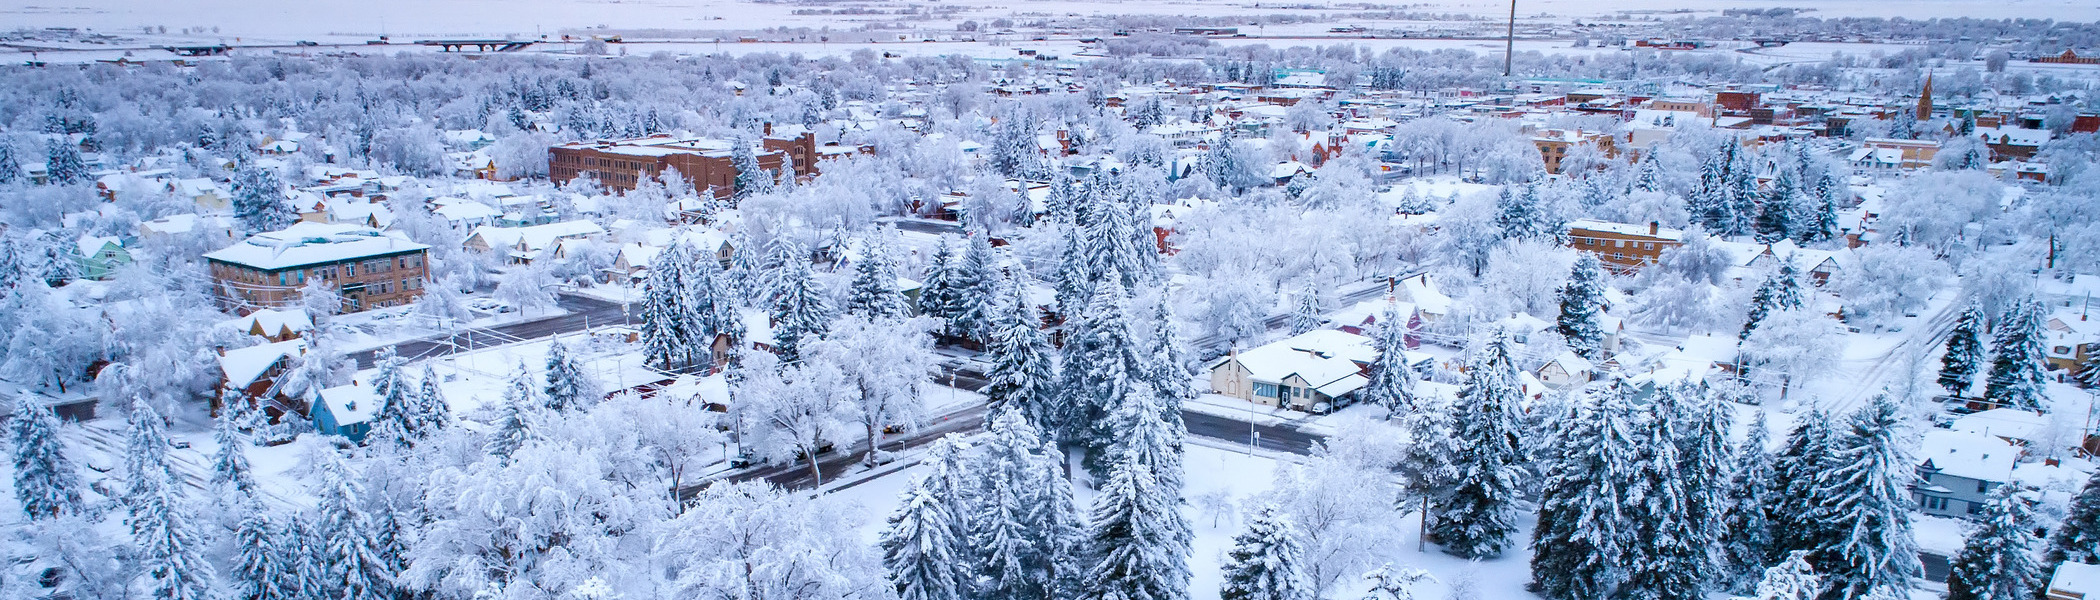 Aerial view of campus in snow